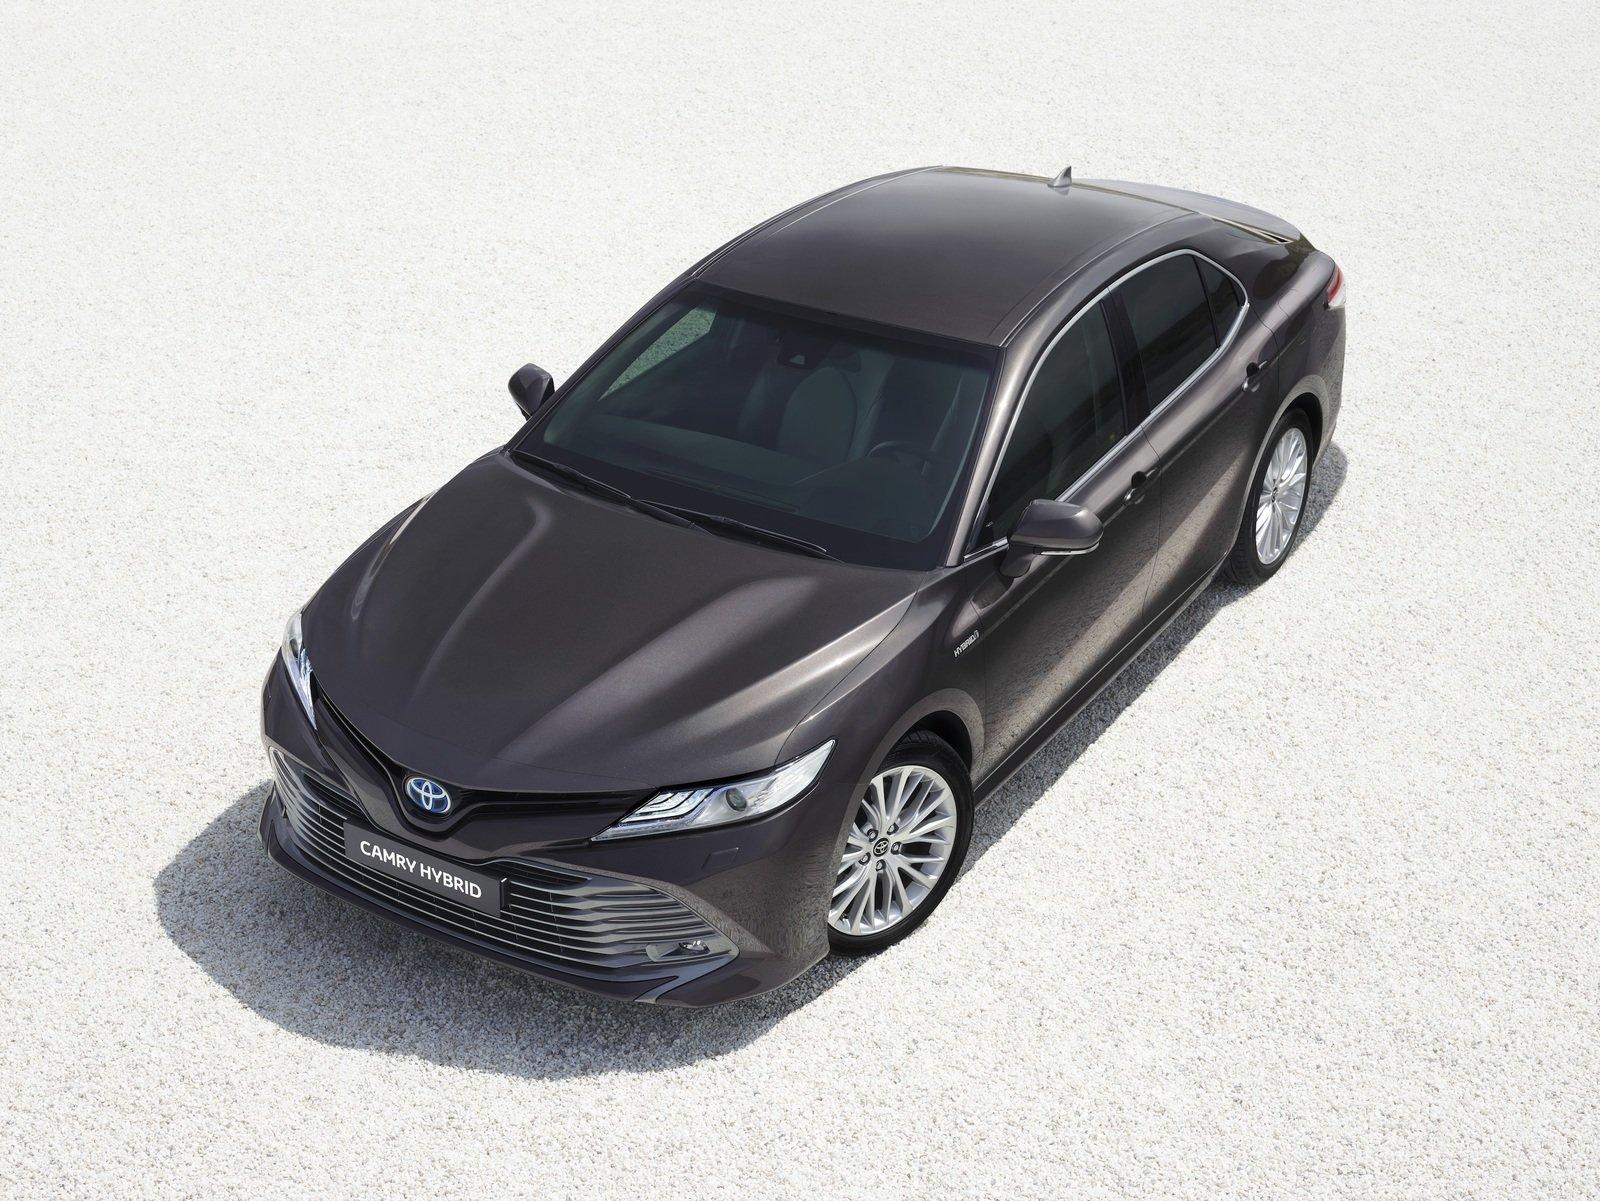 Toyota Camry Hybrid Announces It's Ready For Europe At 2018